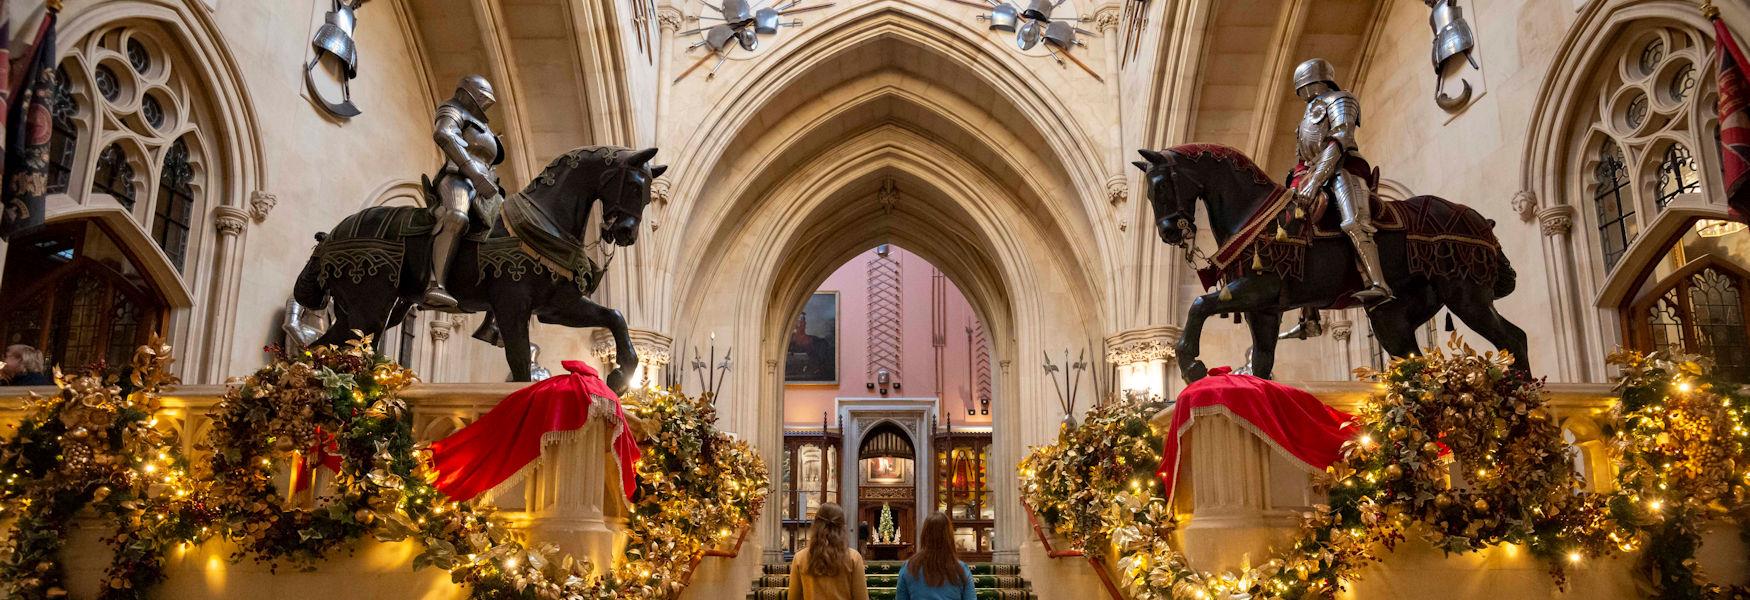 Windsor Castle decorated for Christmas, Royal Collection Trust / © His Majesty King Charles III 2023